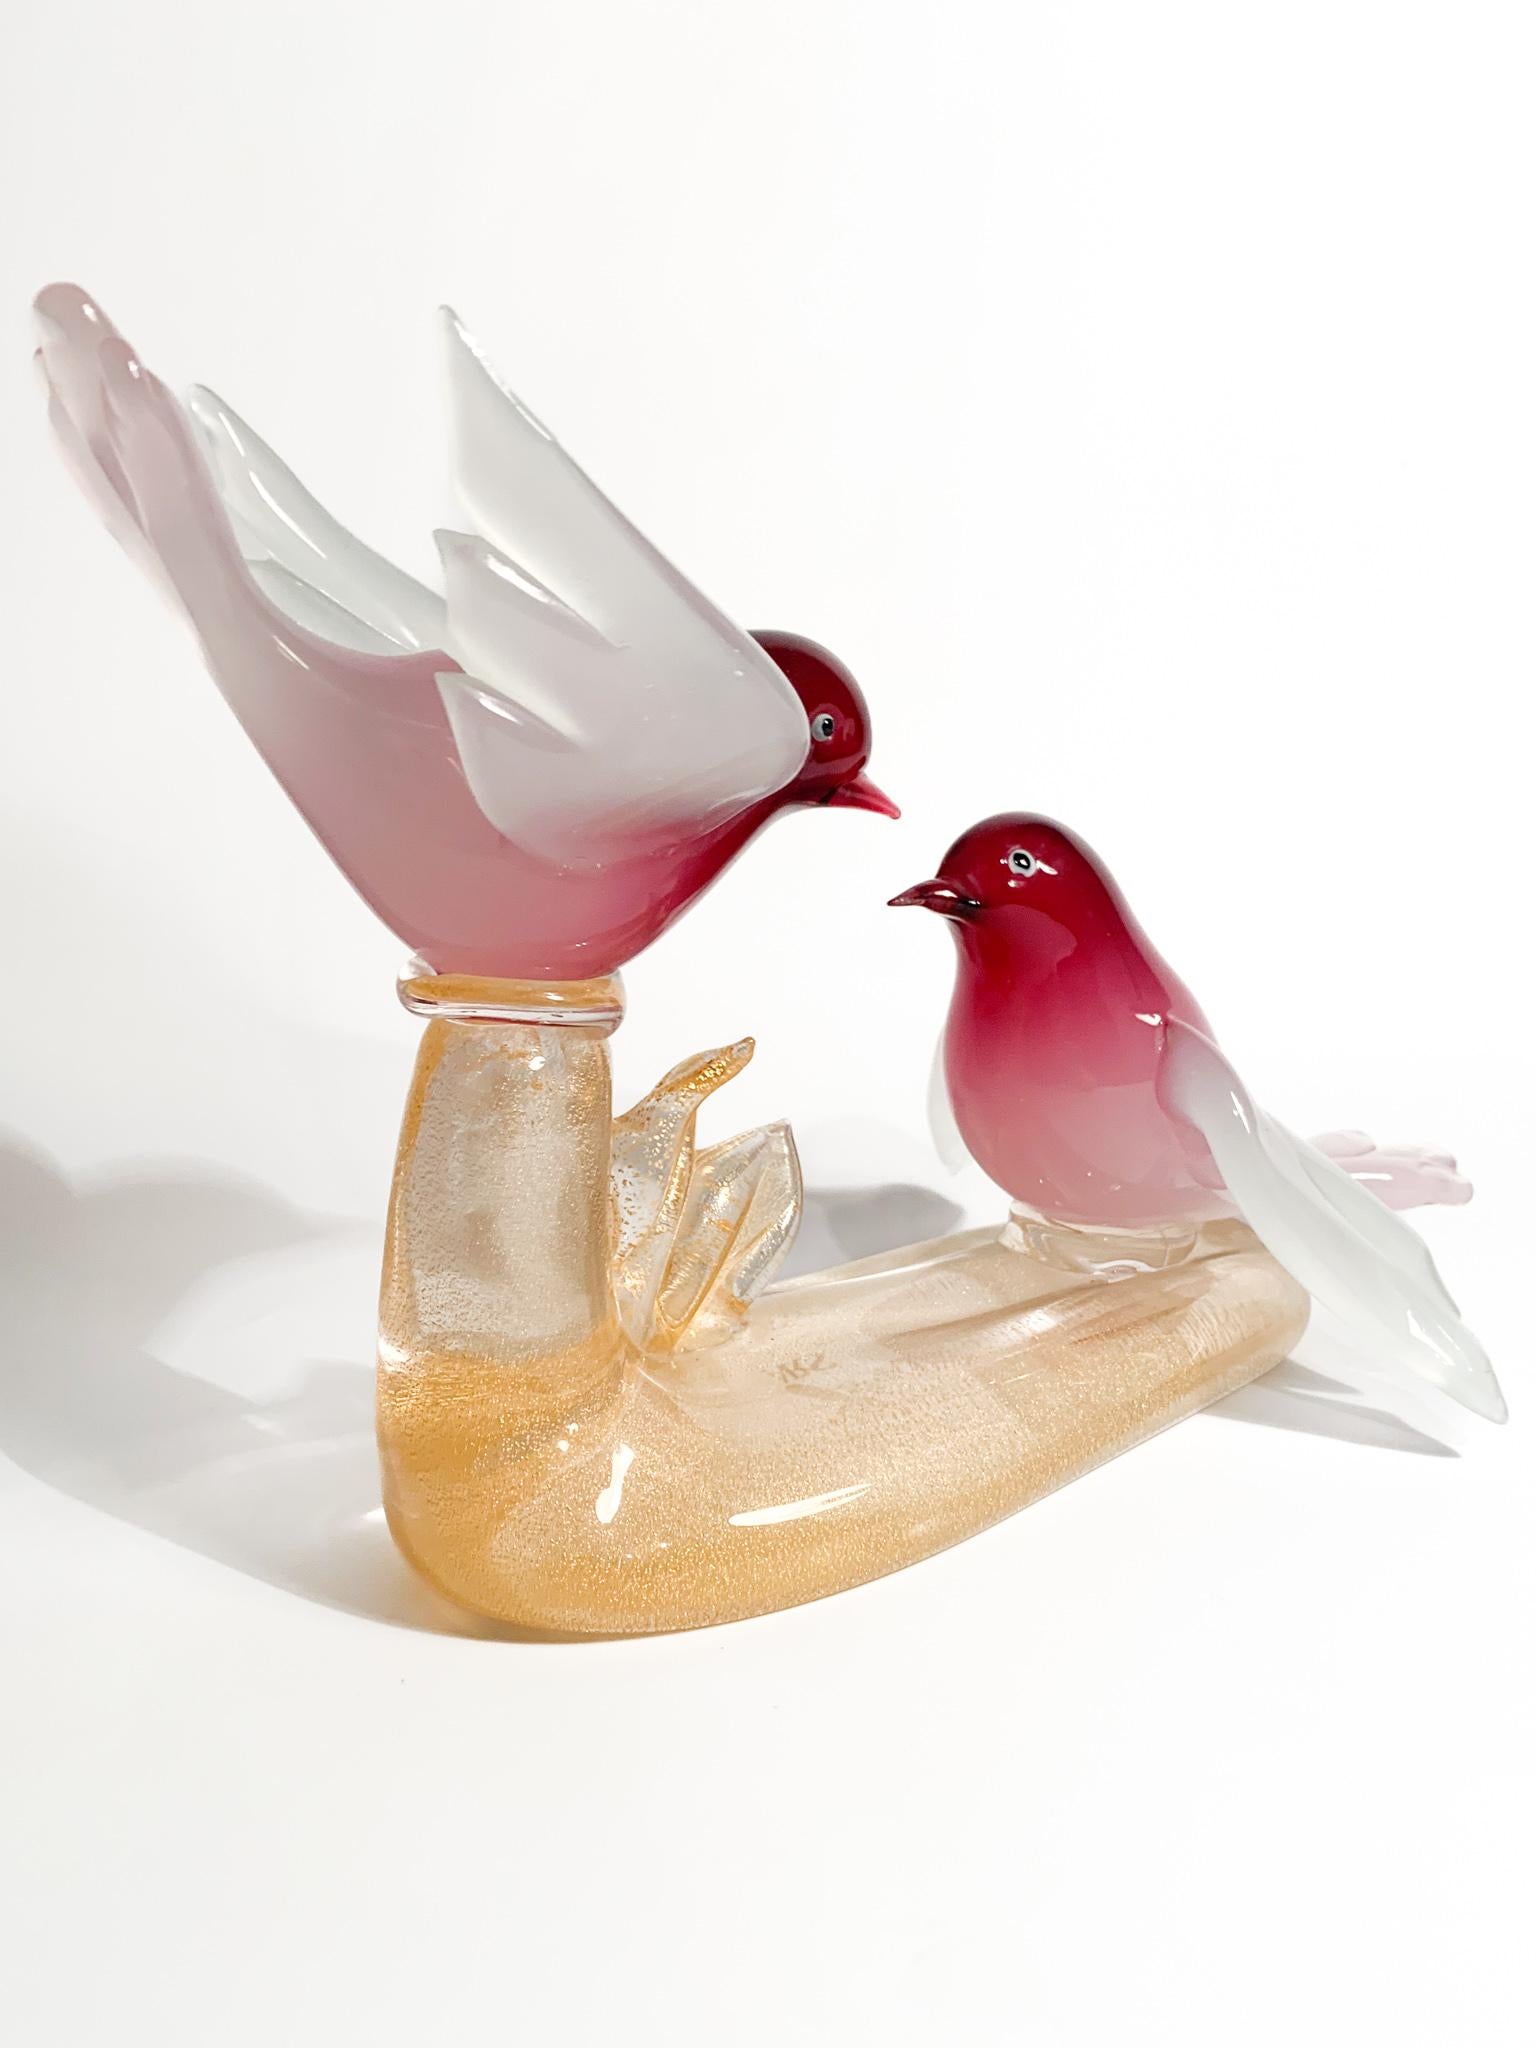 Mid-20th Century Sculpture of a Pair of Birds in Murano Glass by ARS Cenedese 1960s For Sale